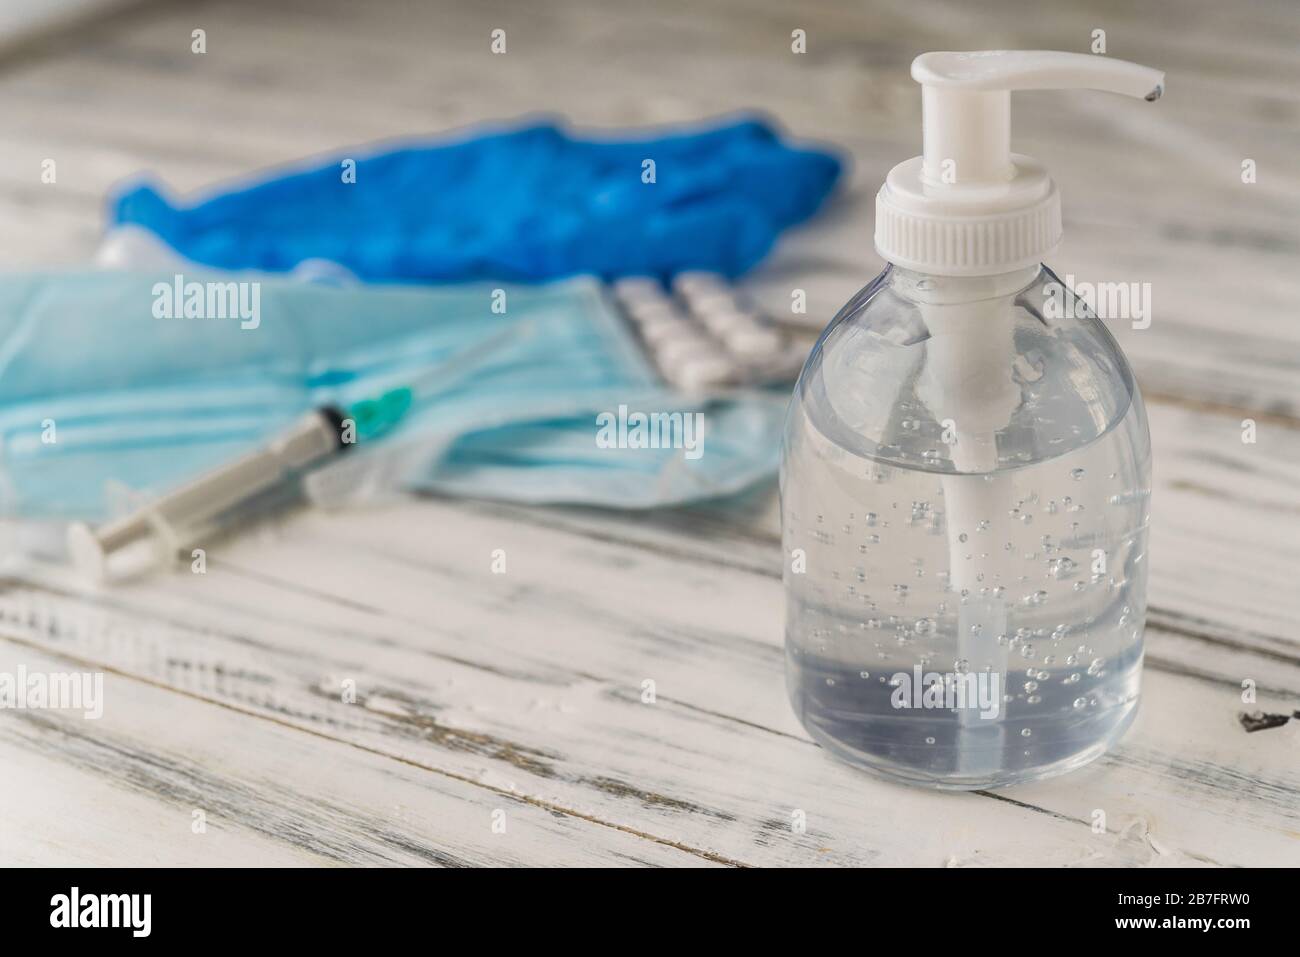 Hand sanitizer with disinfectant, face masks, and drugs against coronavirus. Stock Photo